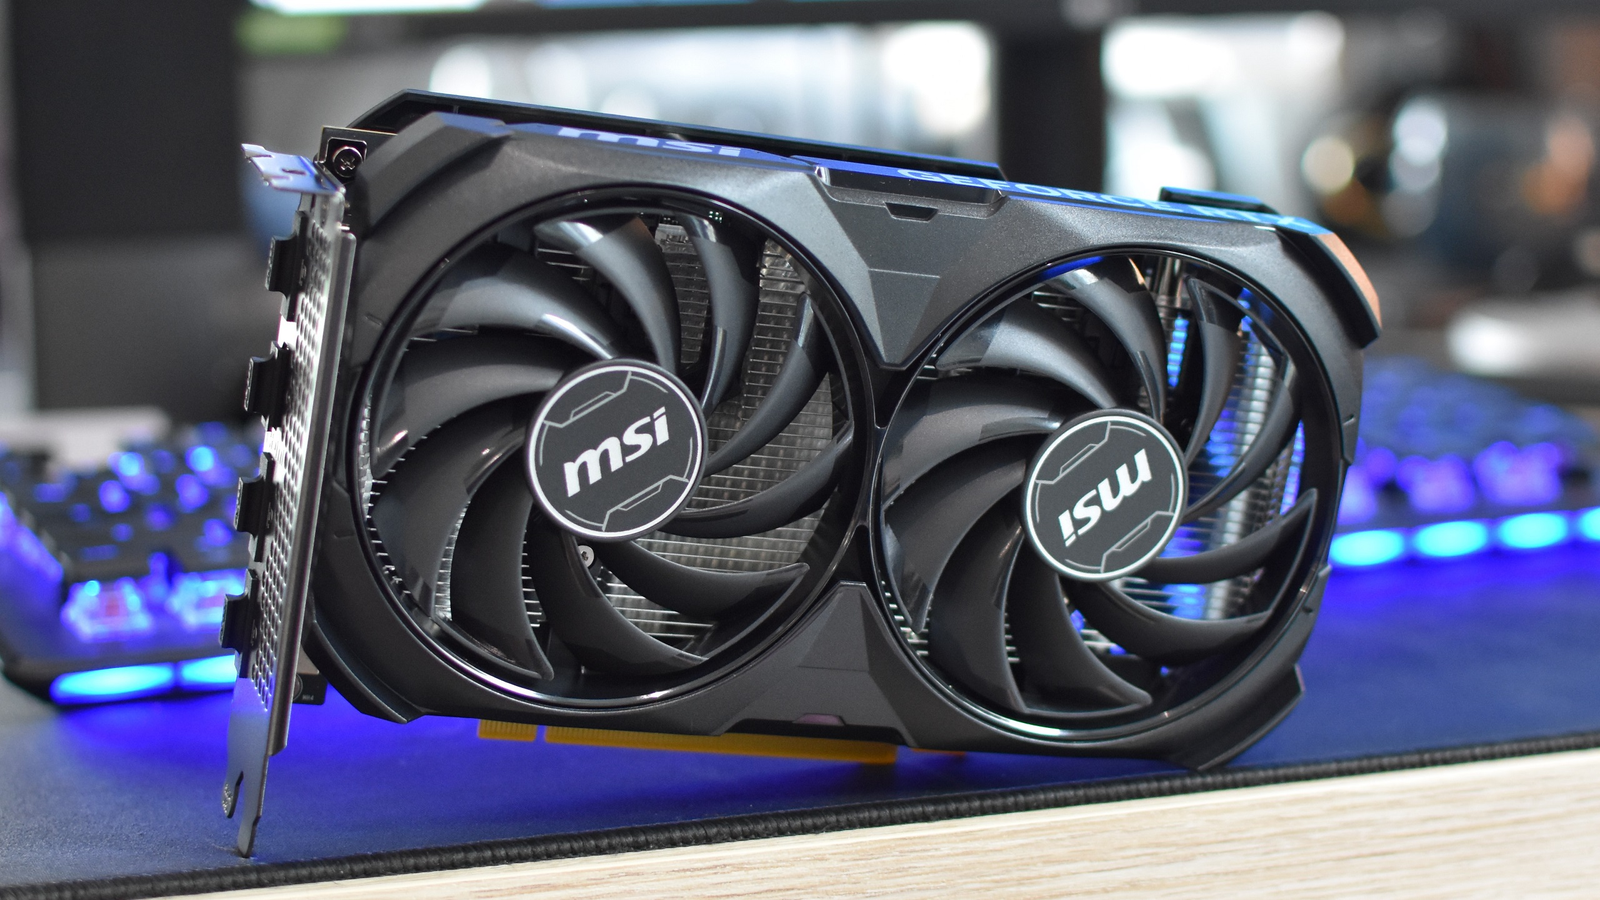 Most Popular Graphics Card: NVIDIA GeForce RTX 3060, Steam